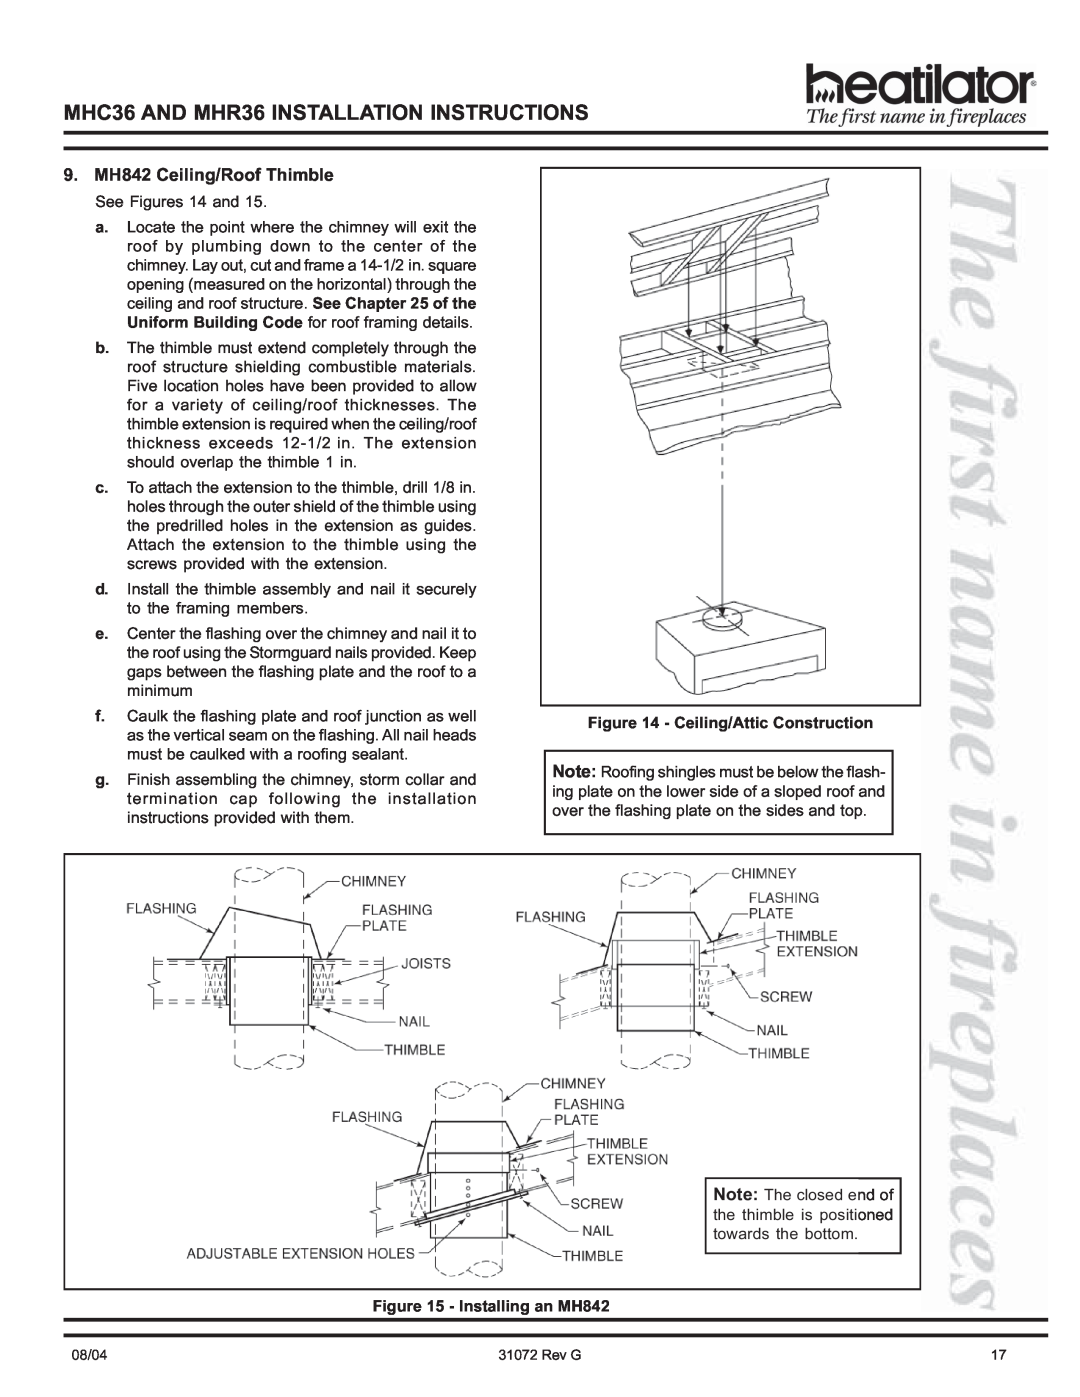 Heart & Home Collectables manual 9. MH842 Ceiling/Roof Thimble, MHC36 AND MHR36 INSTALLATION INSTRUCTIONS 